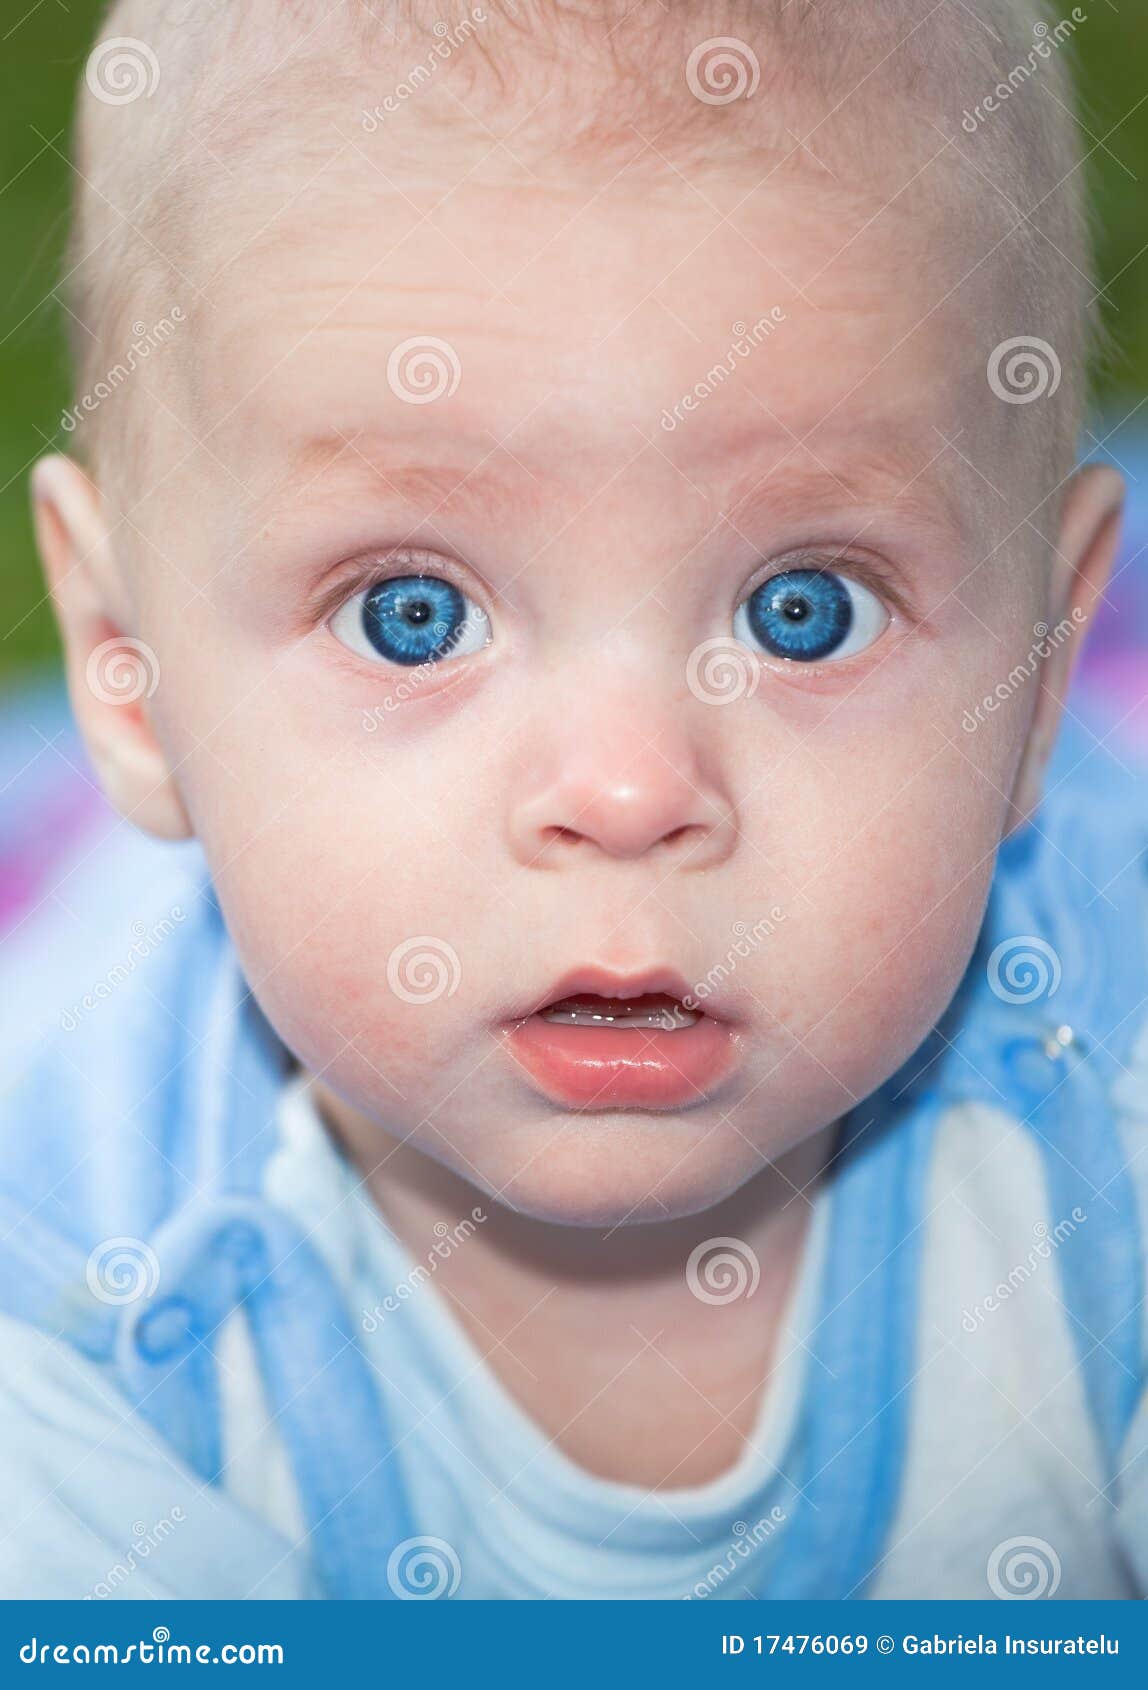 Baby boy stock image. Image of close, looking, infancy - 17476069